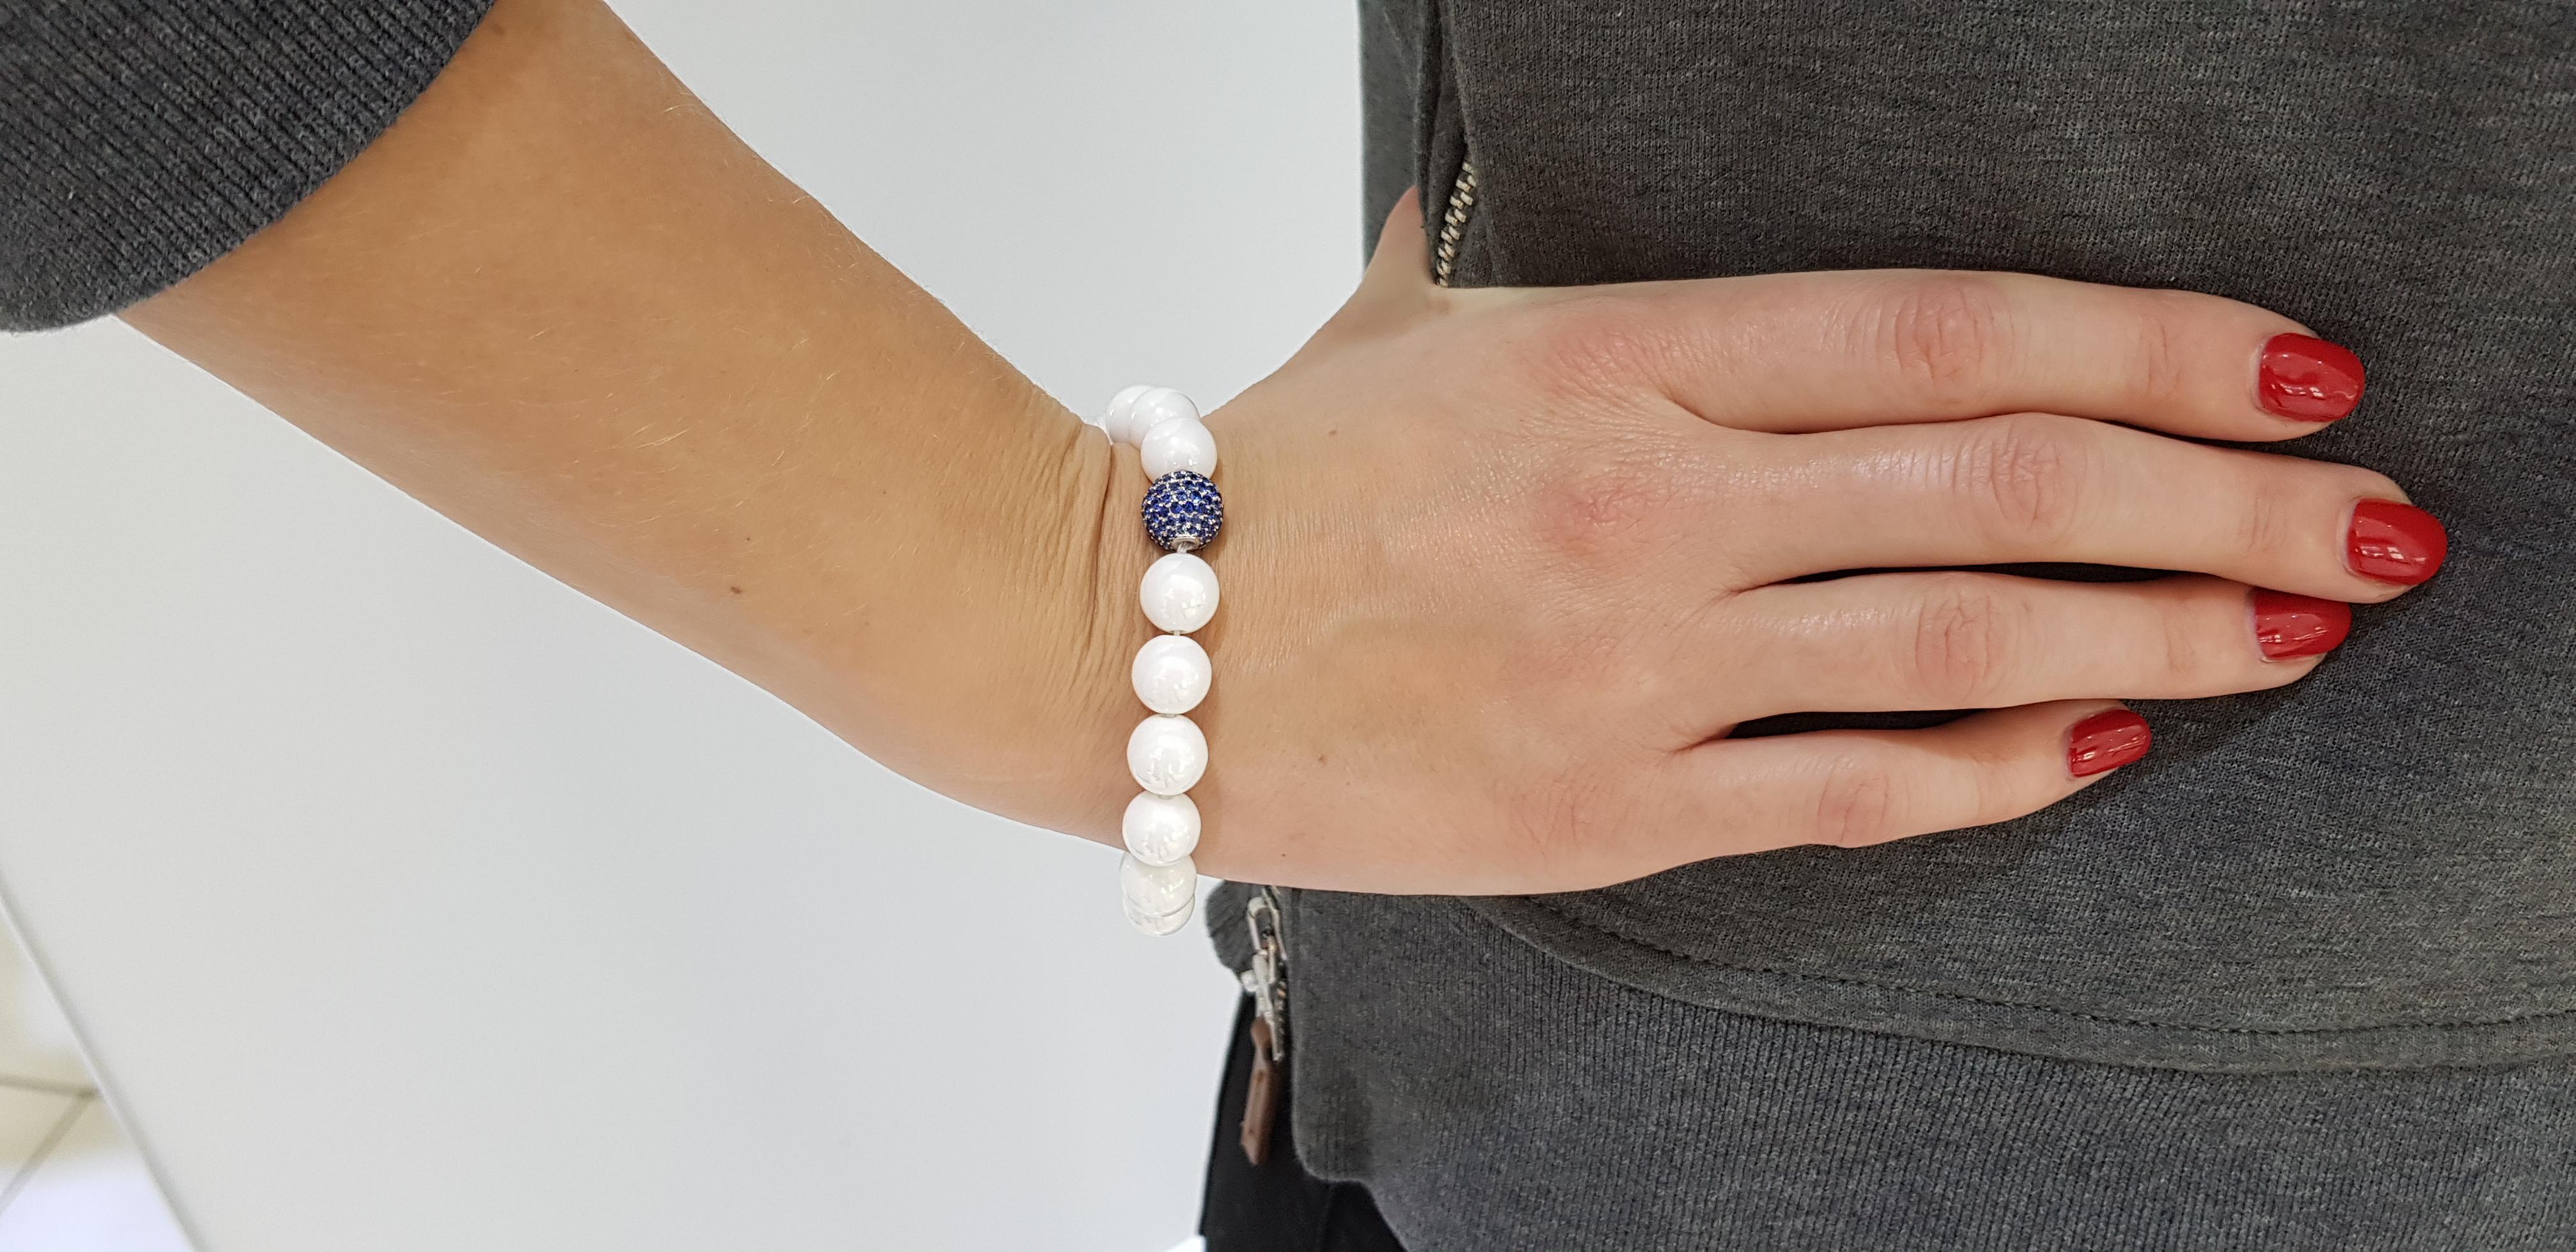 The Original Tresor Paris Bracelet features one Sphere with 1.80 Carat Pave set Blue Sapphire as a focal point. Set in 18 Karat White Gold and has 16 ceramic beads as well as one 18 Karat White gold bead clasp. Size will fit all from 7.00 to 8.00